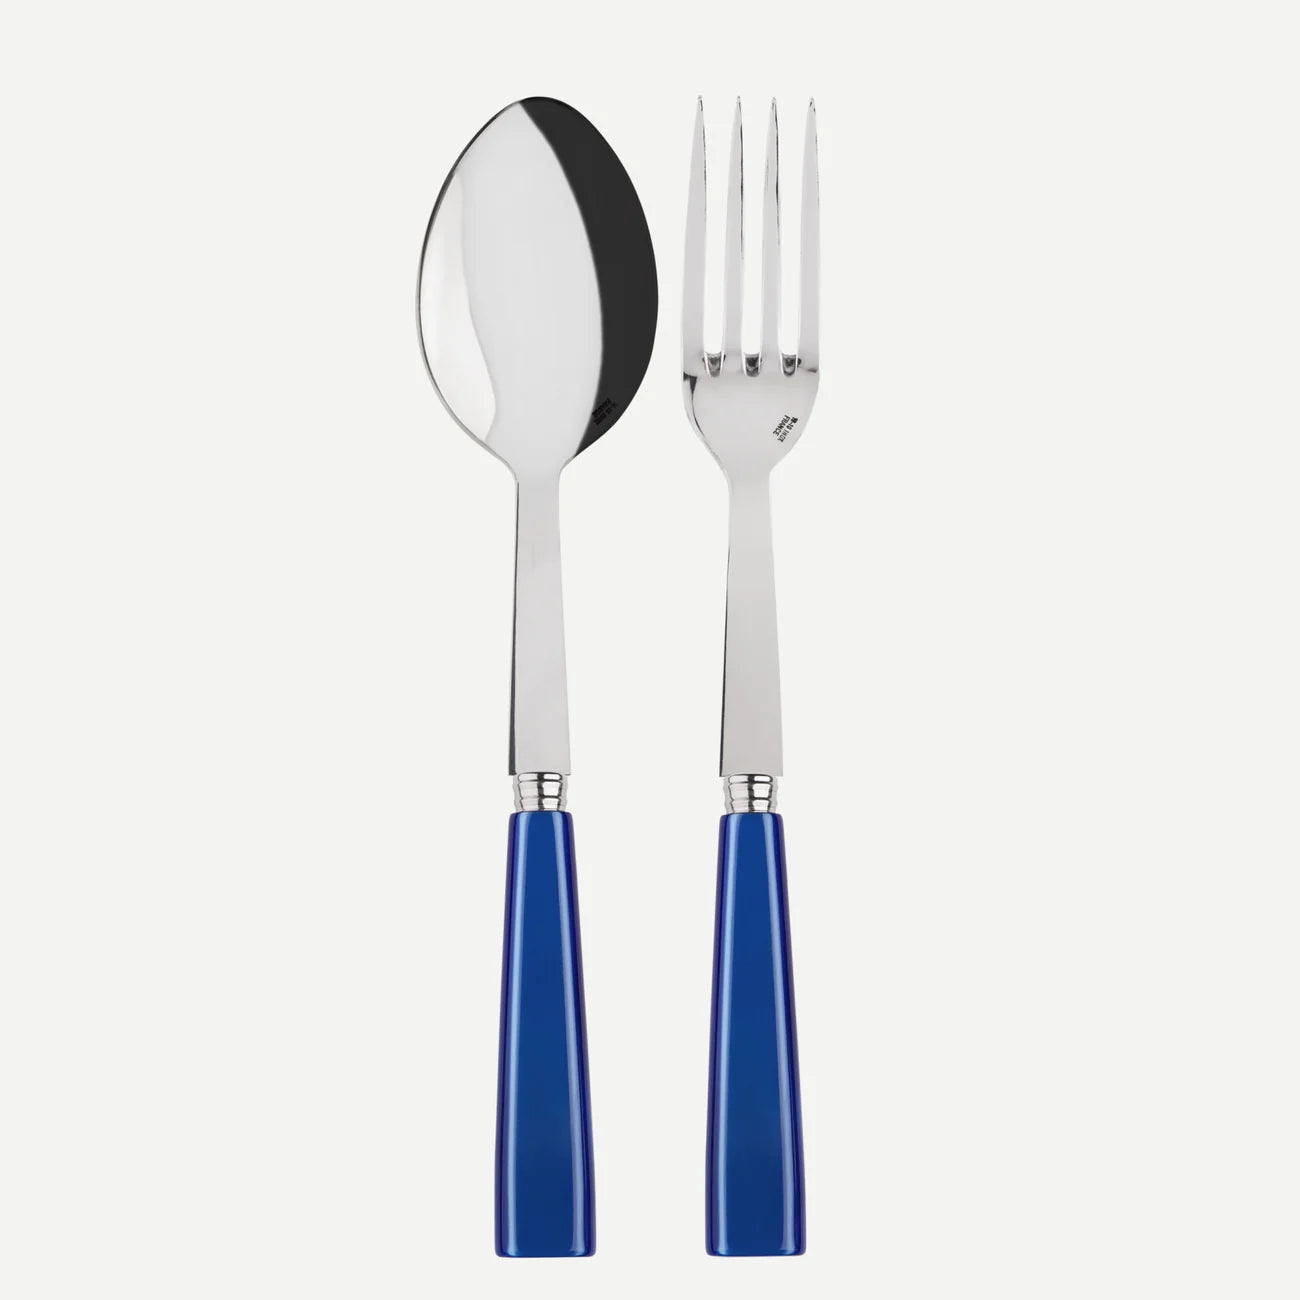 A sabre Paris icone serving set consisting of a large fork and a large spoon with bright lupis blue handles. 